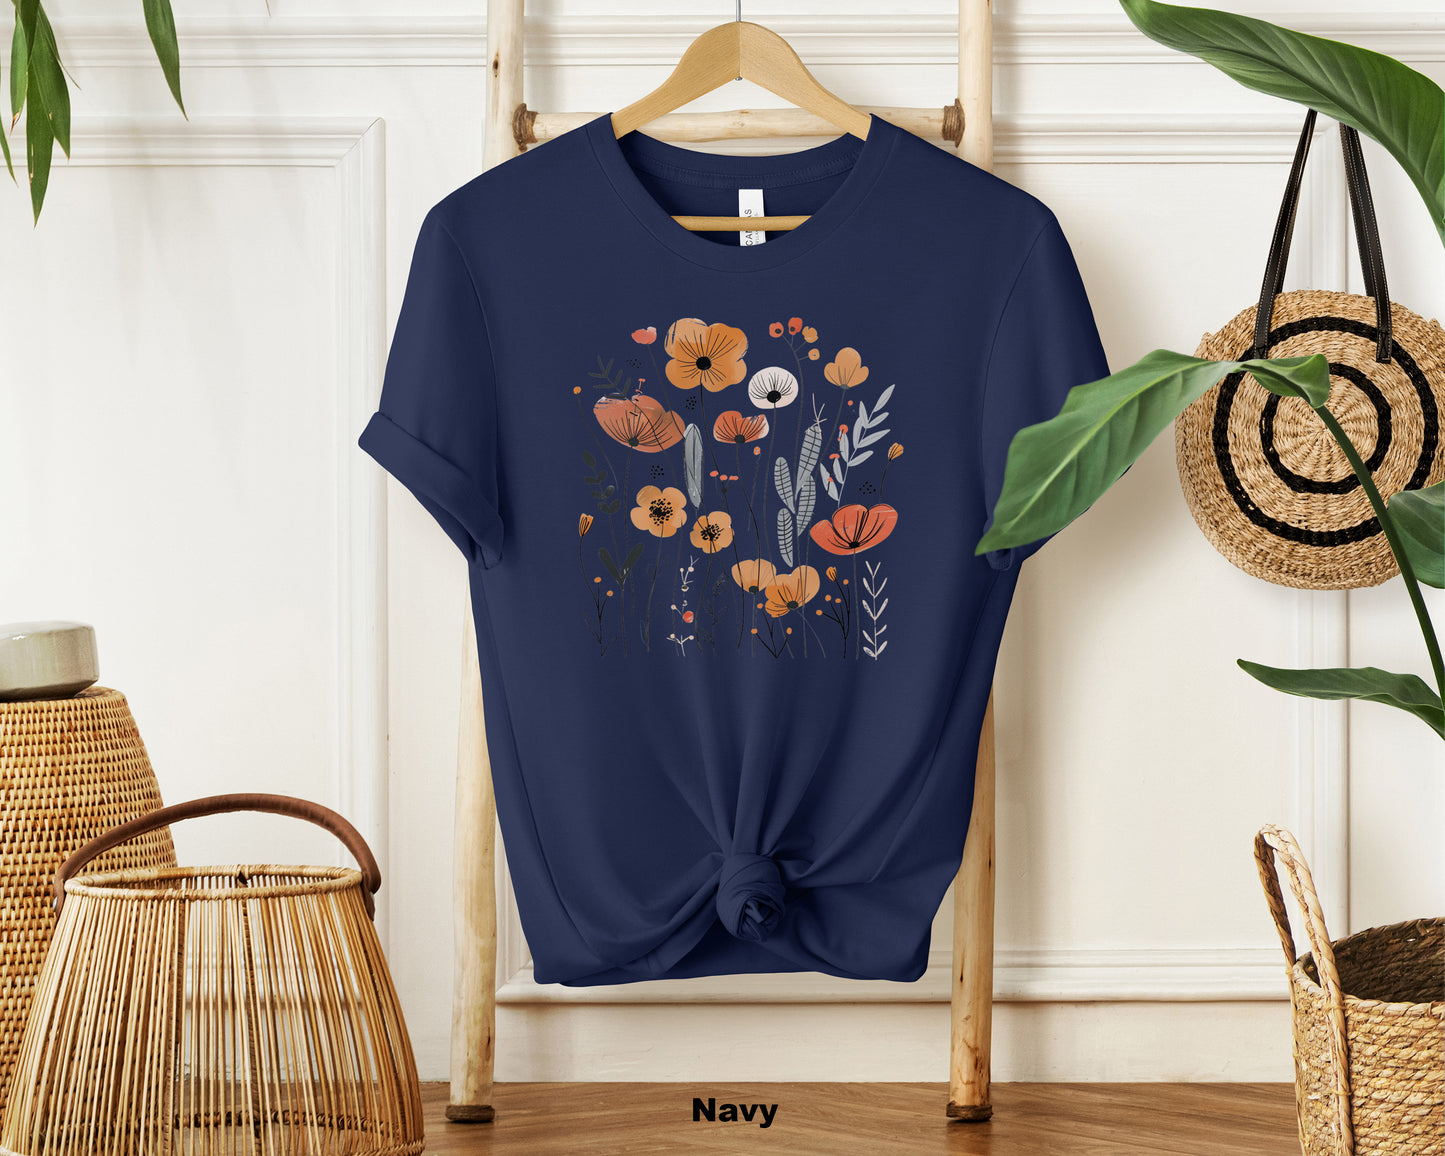 Tranquil Blossoms Neutral Floral Shirt - Gift for Flower Lovers